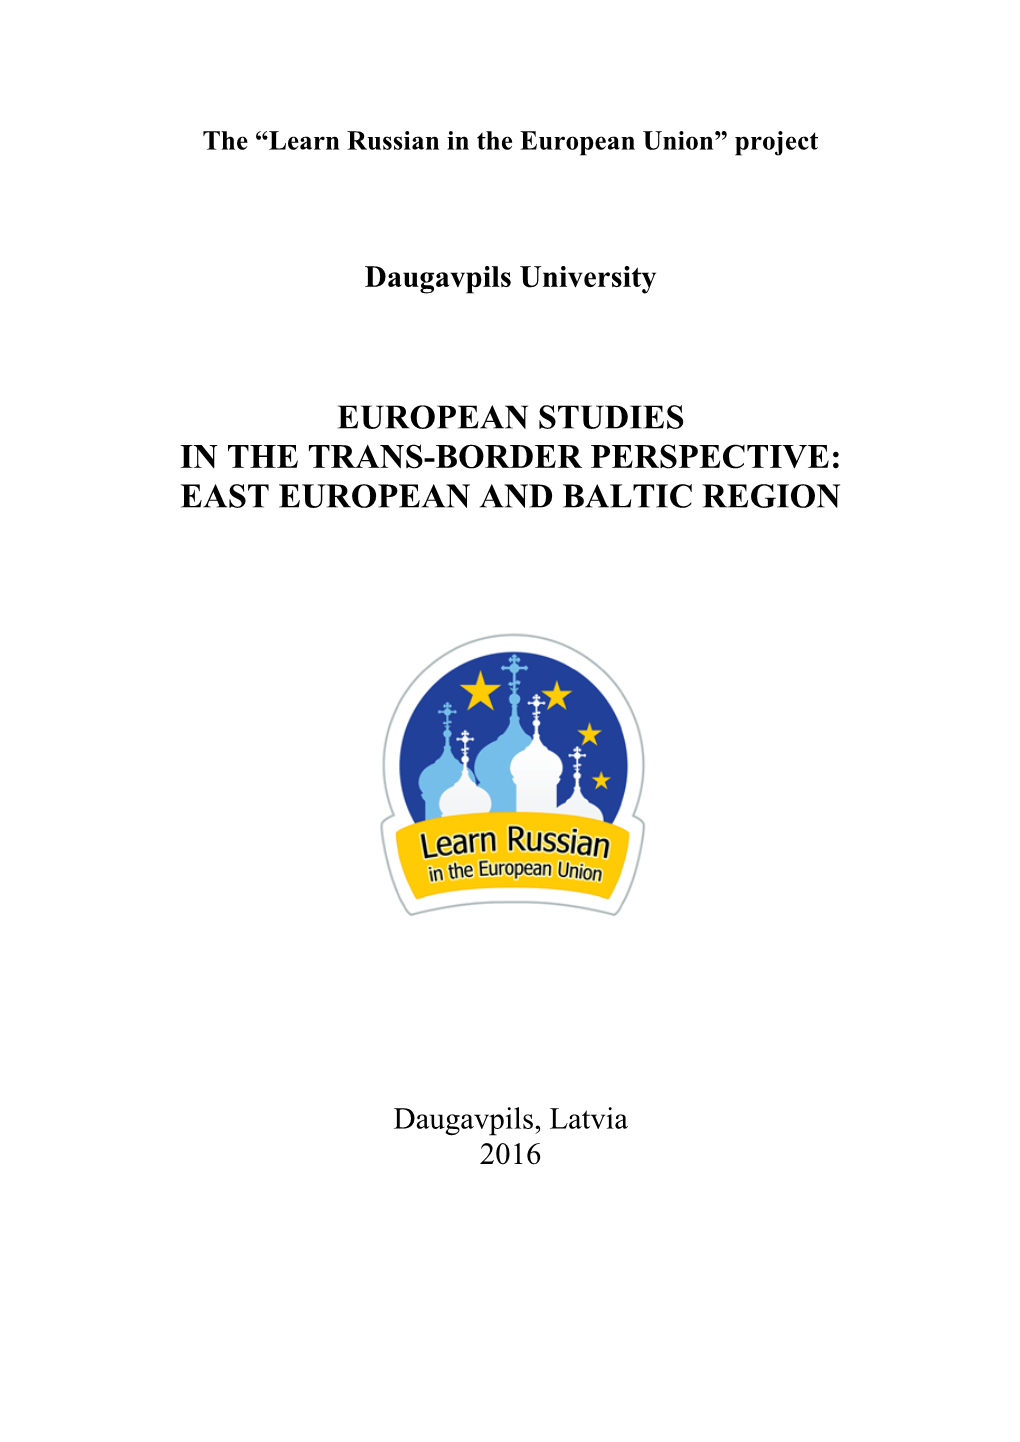 European Studies in the Trans-Border Perspective: East European and Baltic Region